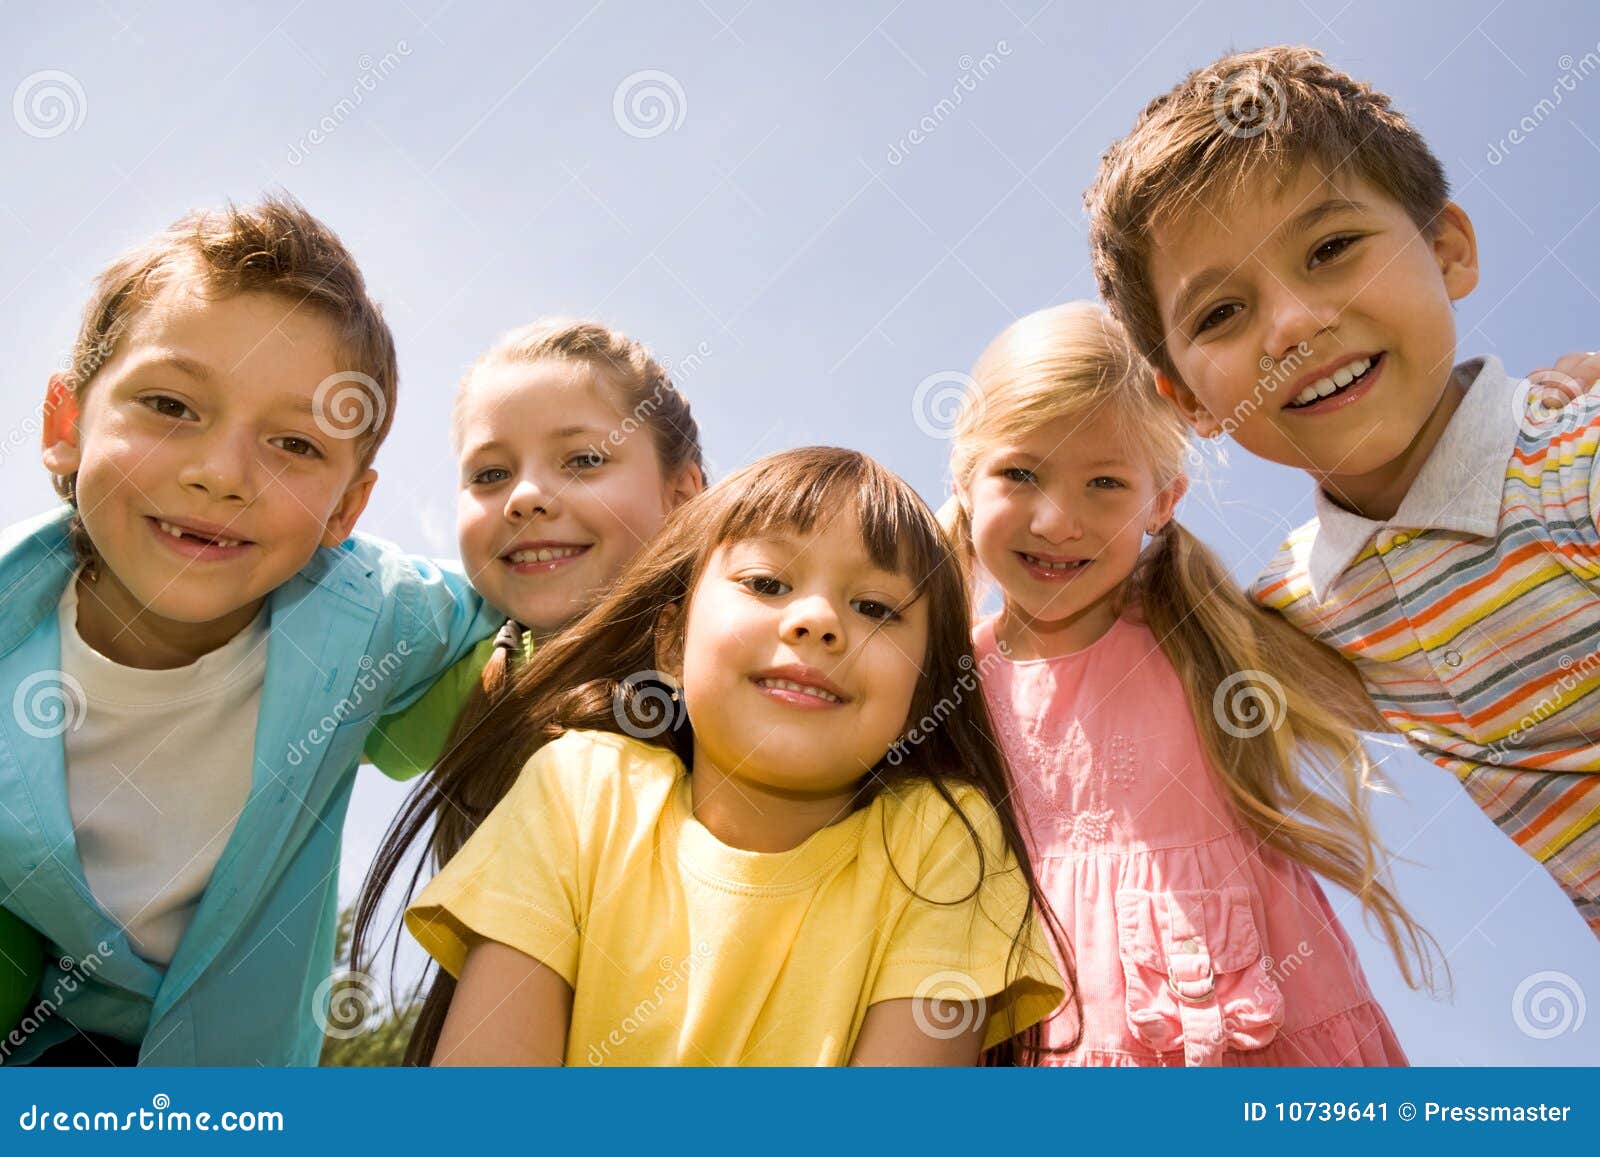 Preschoolers stock image. Image of friends, natural, nature - 10739641